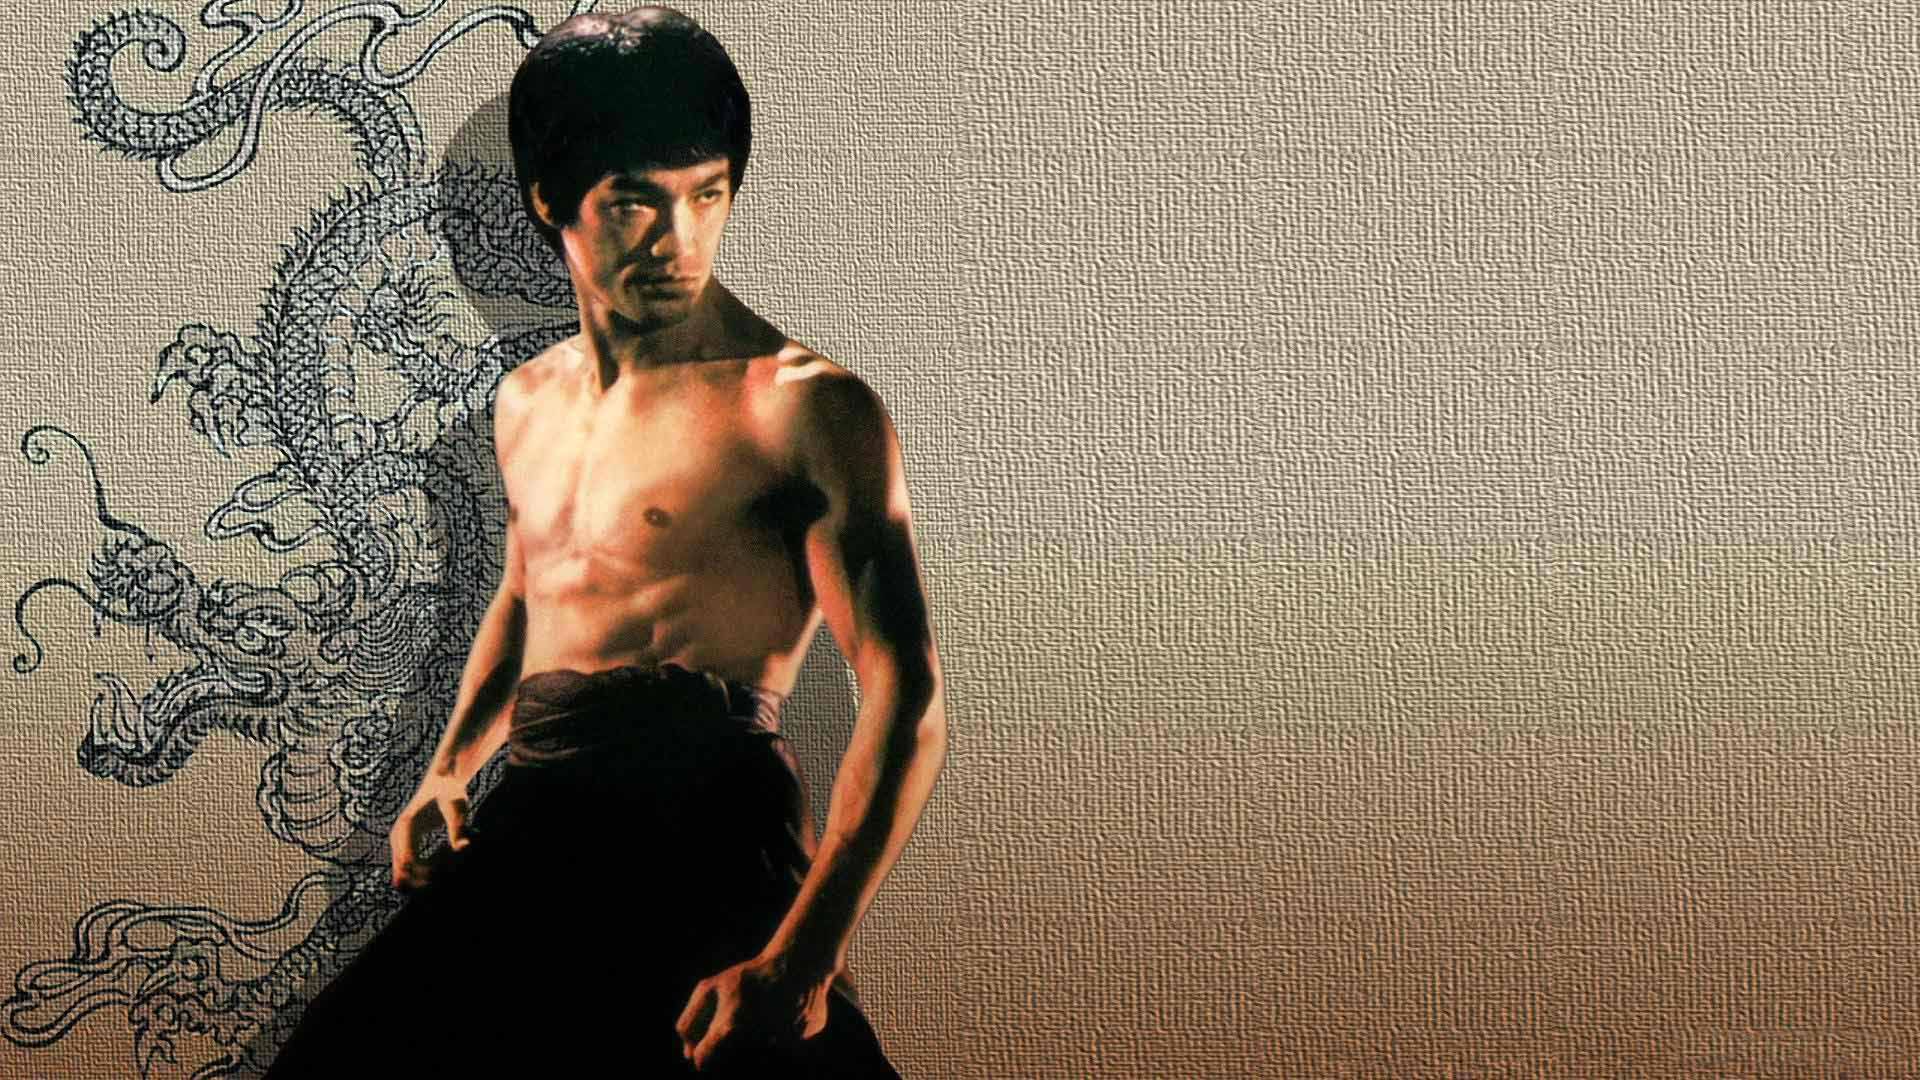 Death by Misadventure: The Mysterious Life of Bruce Lee Backdrop